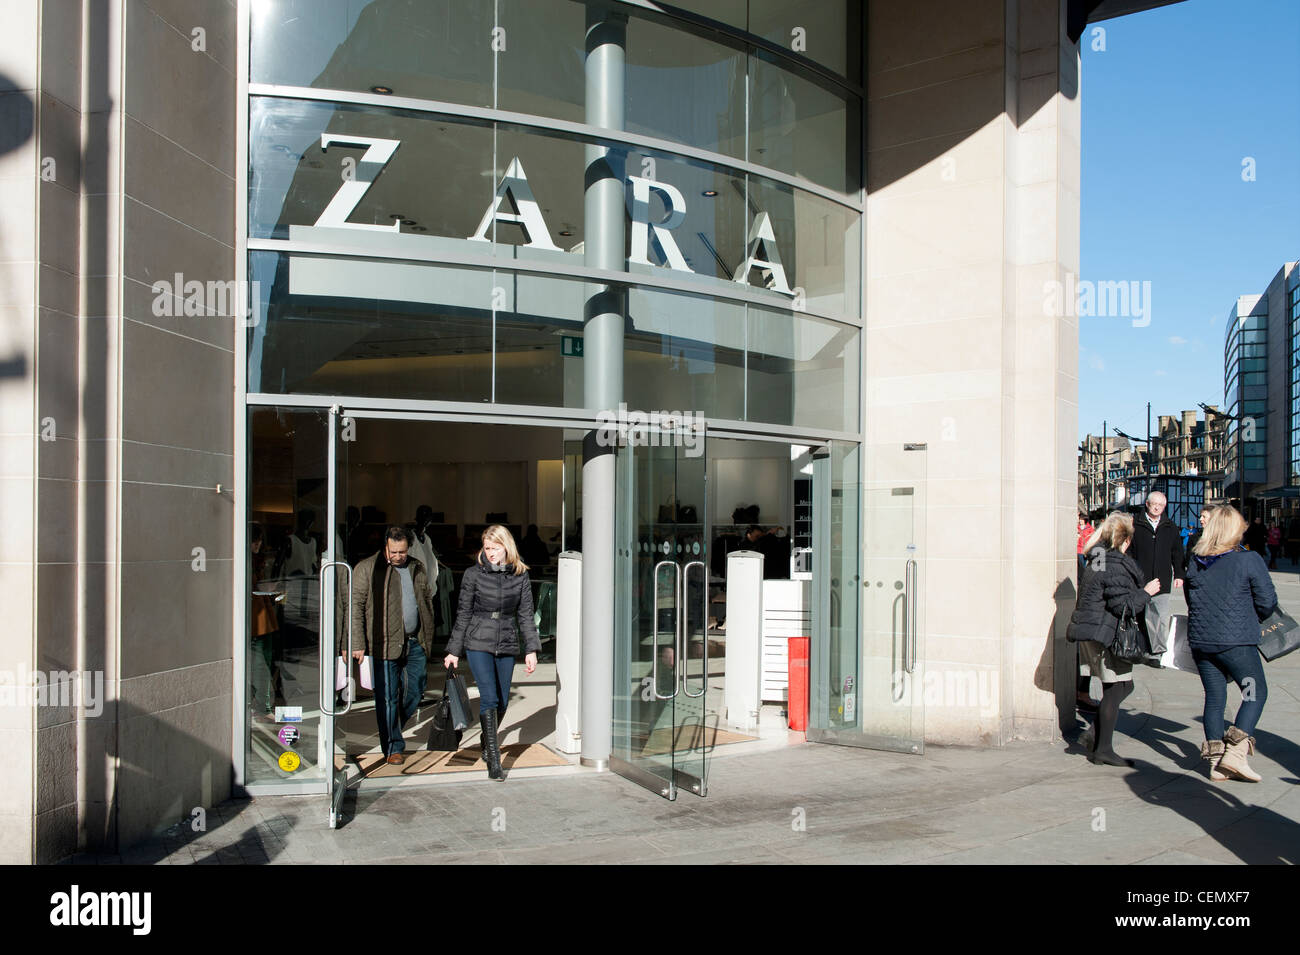 The Zara clothing shop located on New 